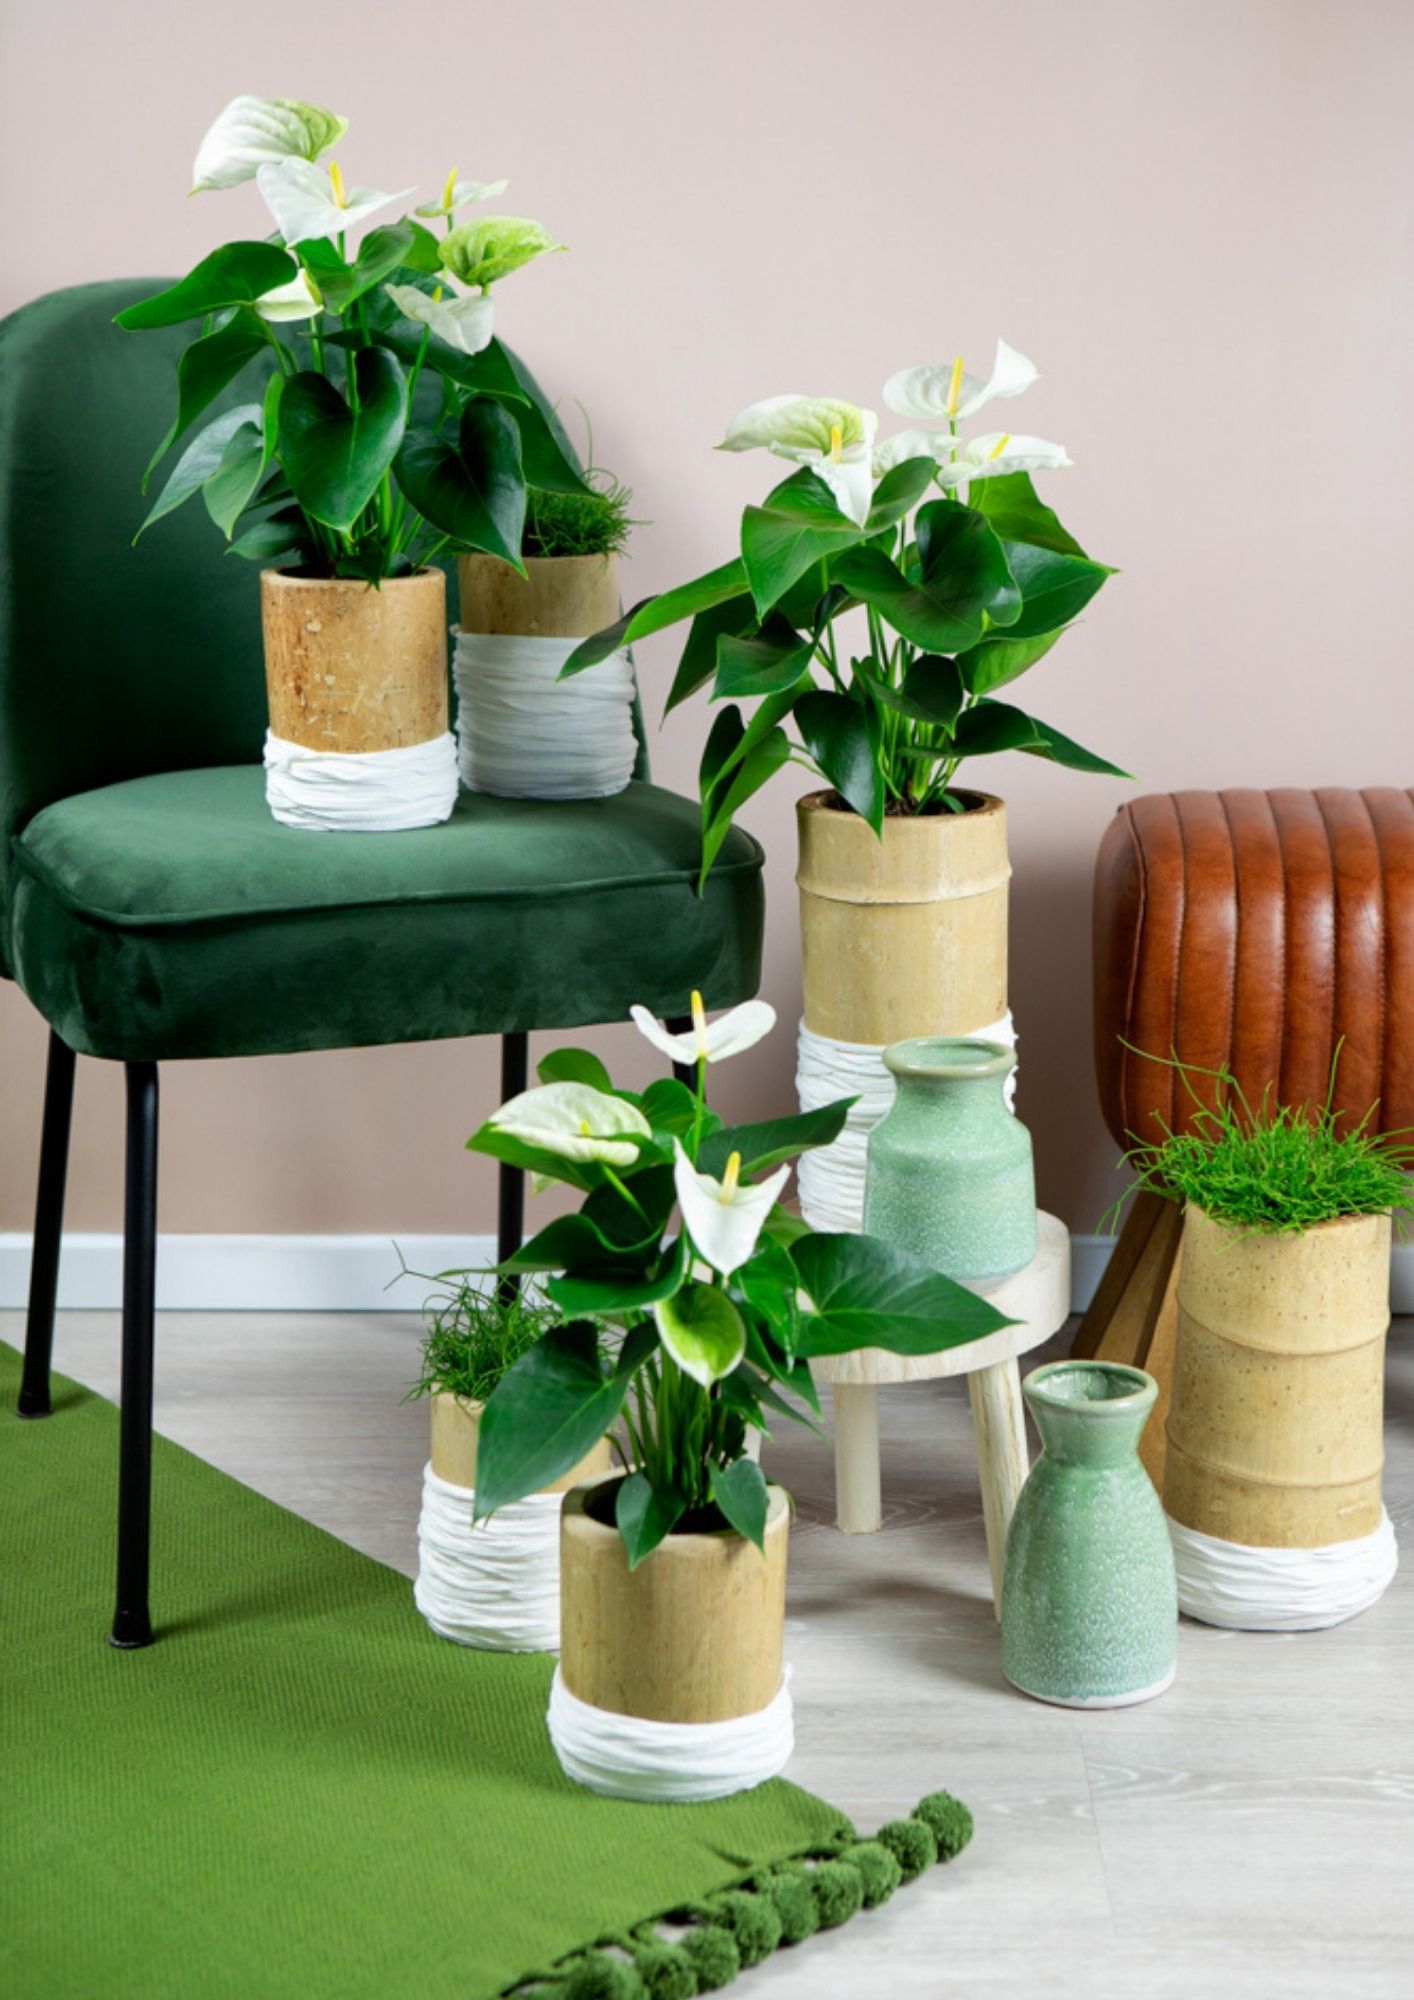 Plant Design: plants first when decorating your home